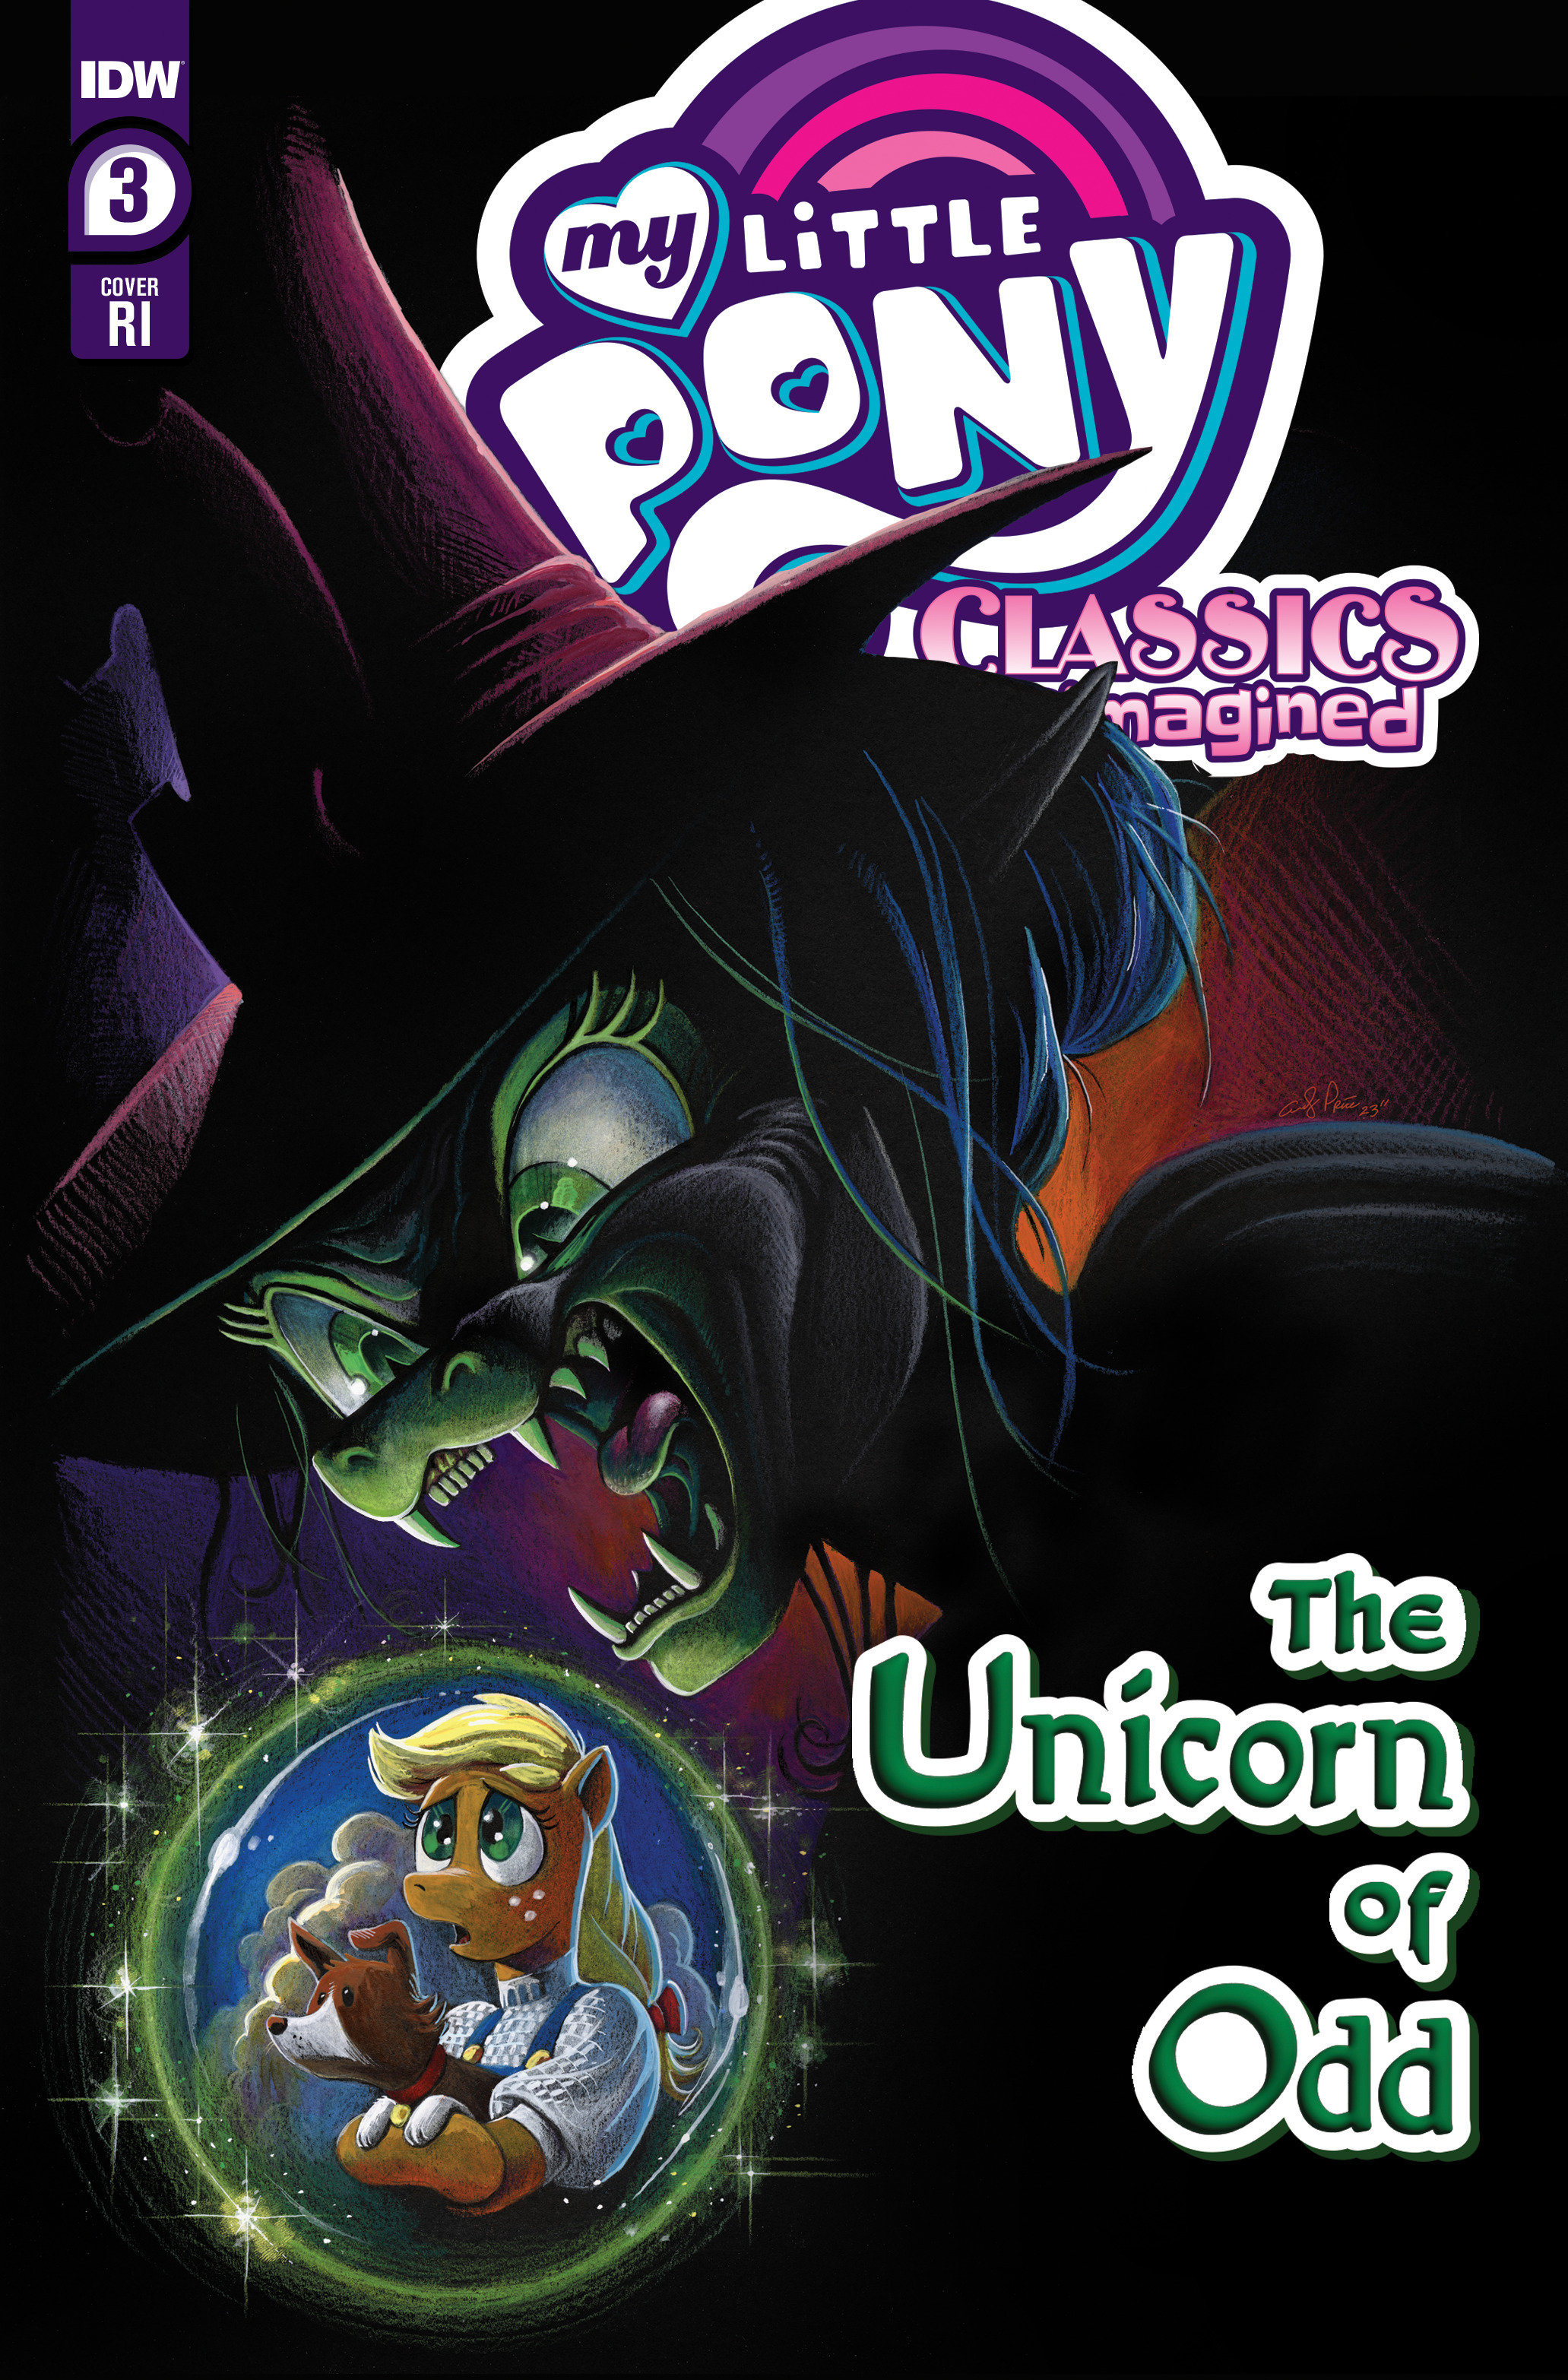 My Little Pony: Classics Reimagined--The Unicorn of Odd #3 Cover Price 1 for 10 Incentive